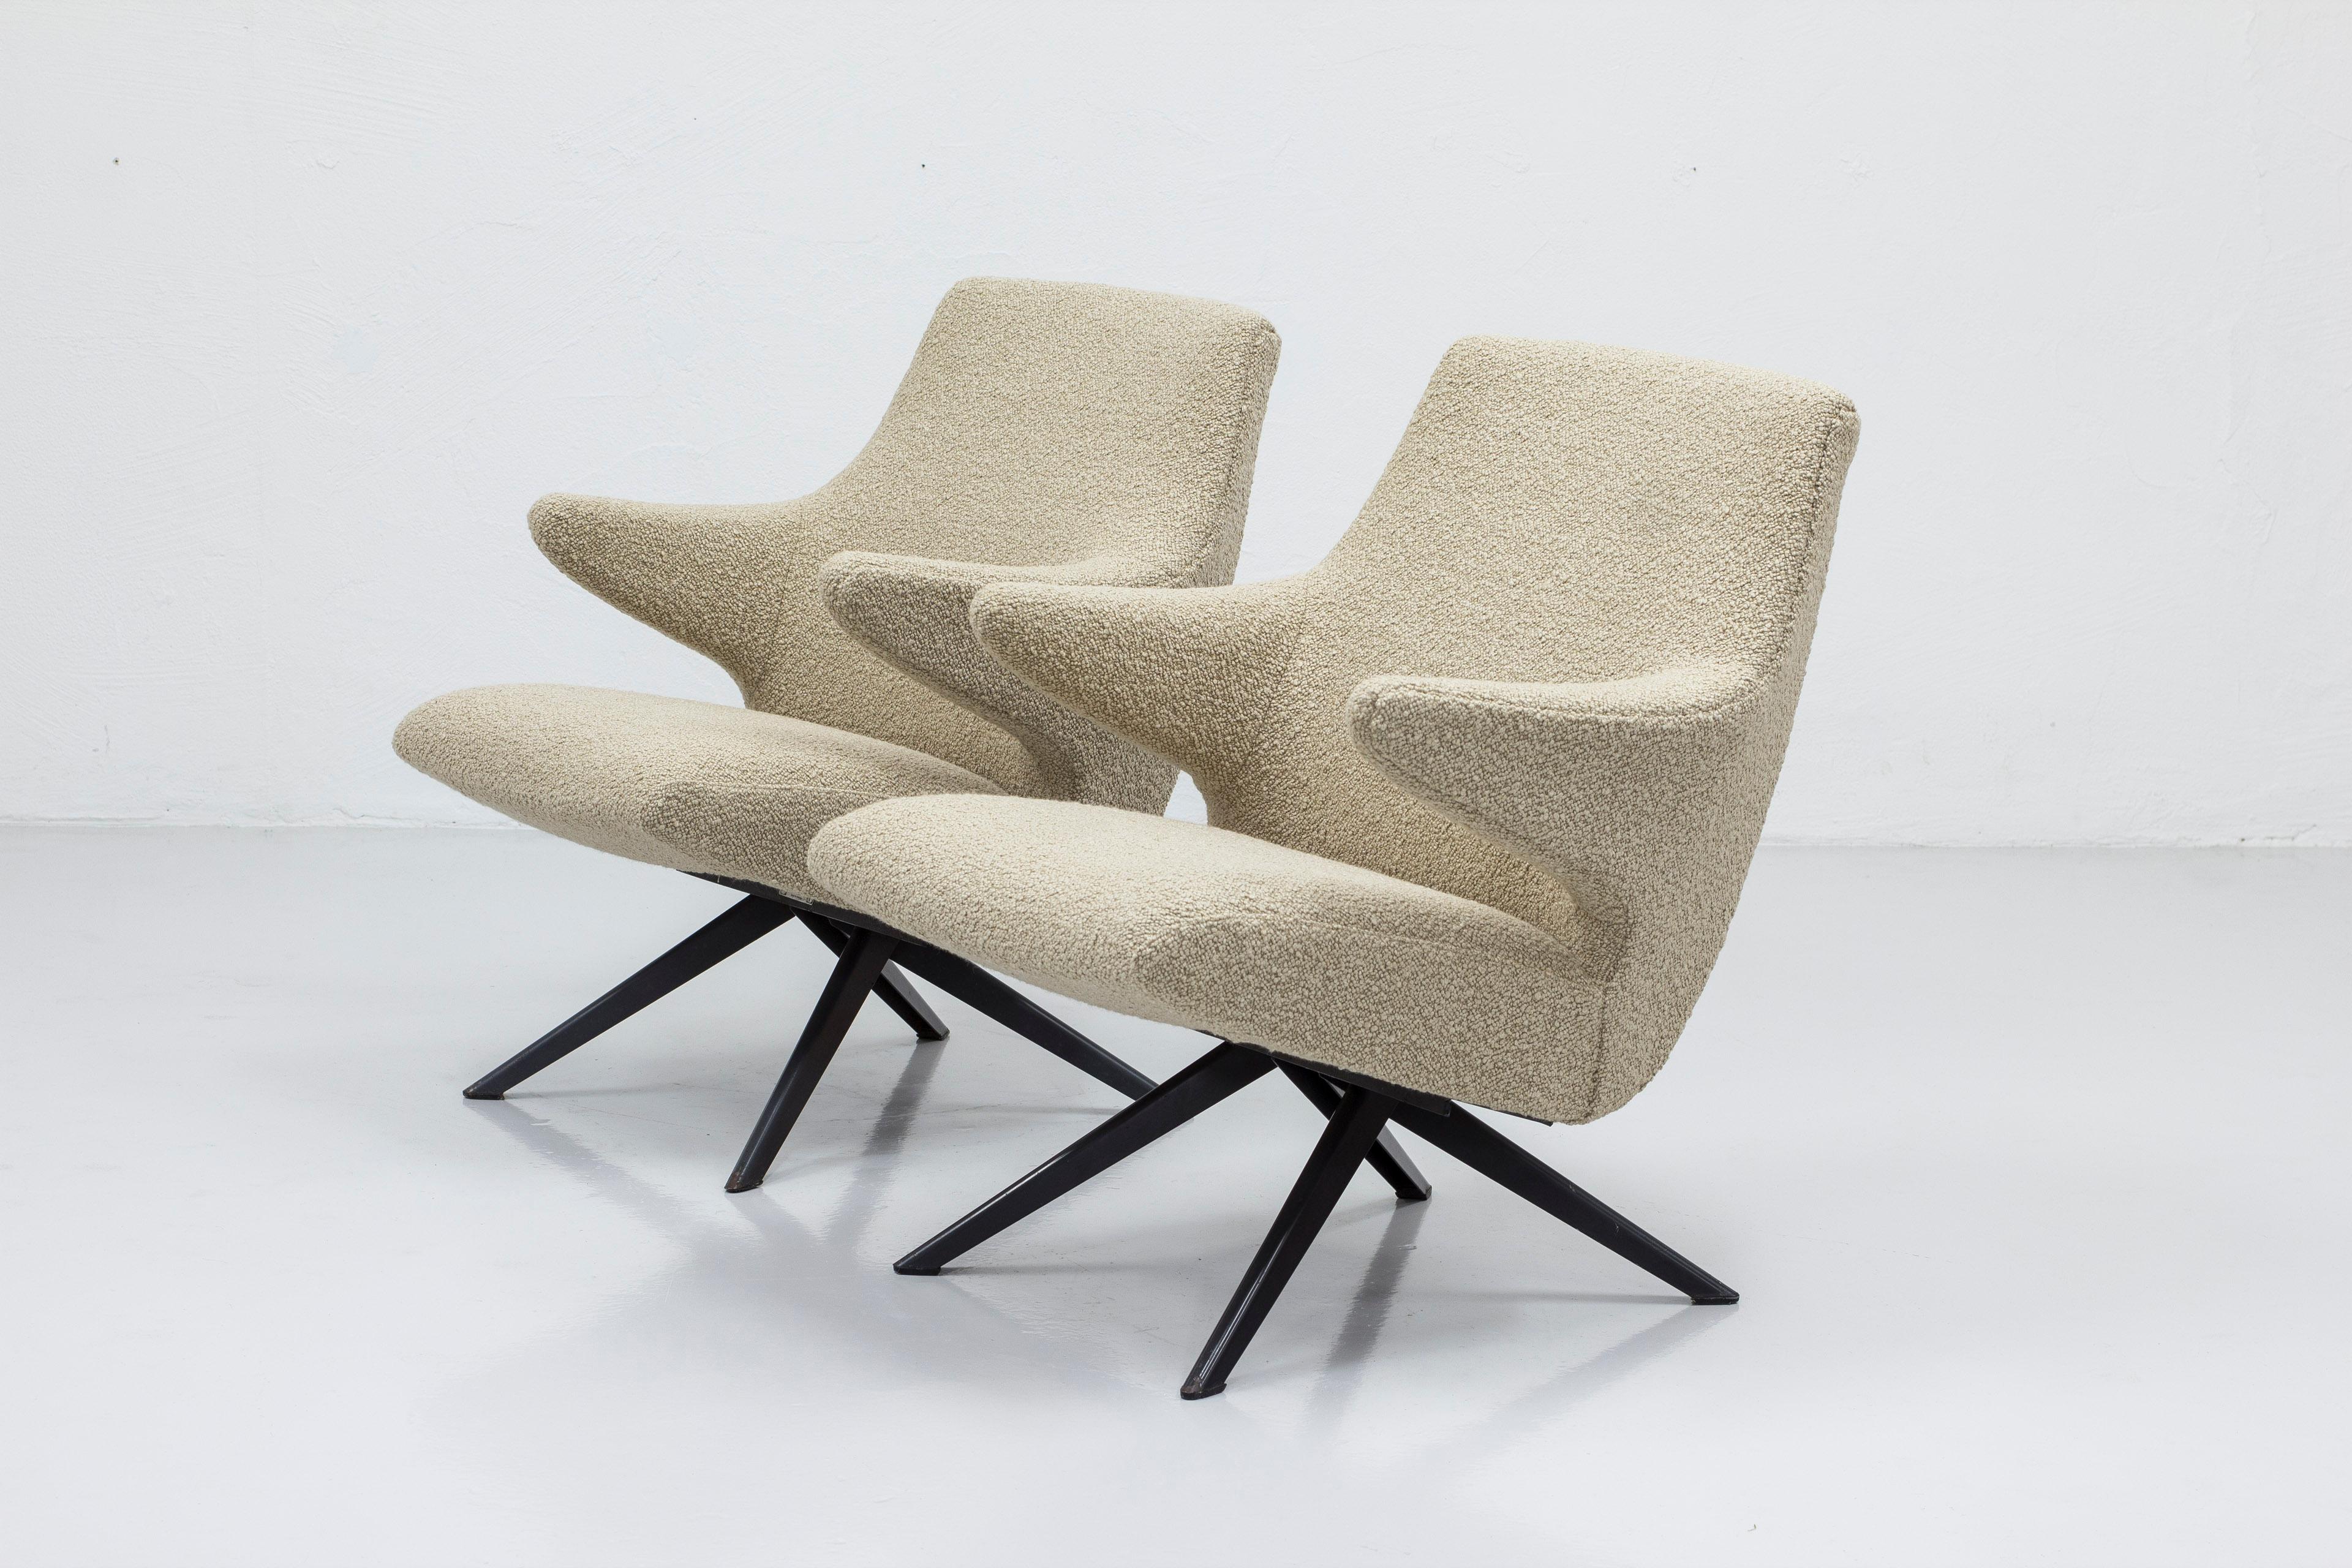 Mid-20th Century Pair of lounge chairs designed by Bengt Ruda by Nordiska Kompaniet, 1950 For Sale